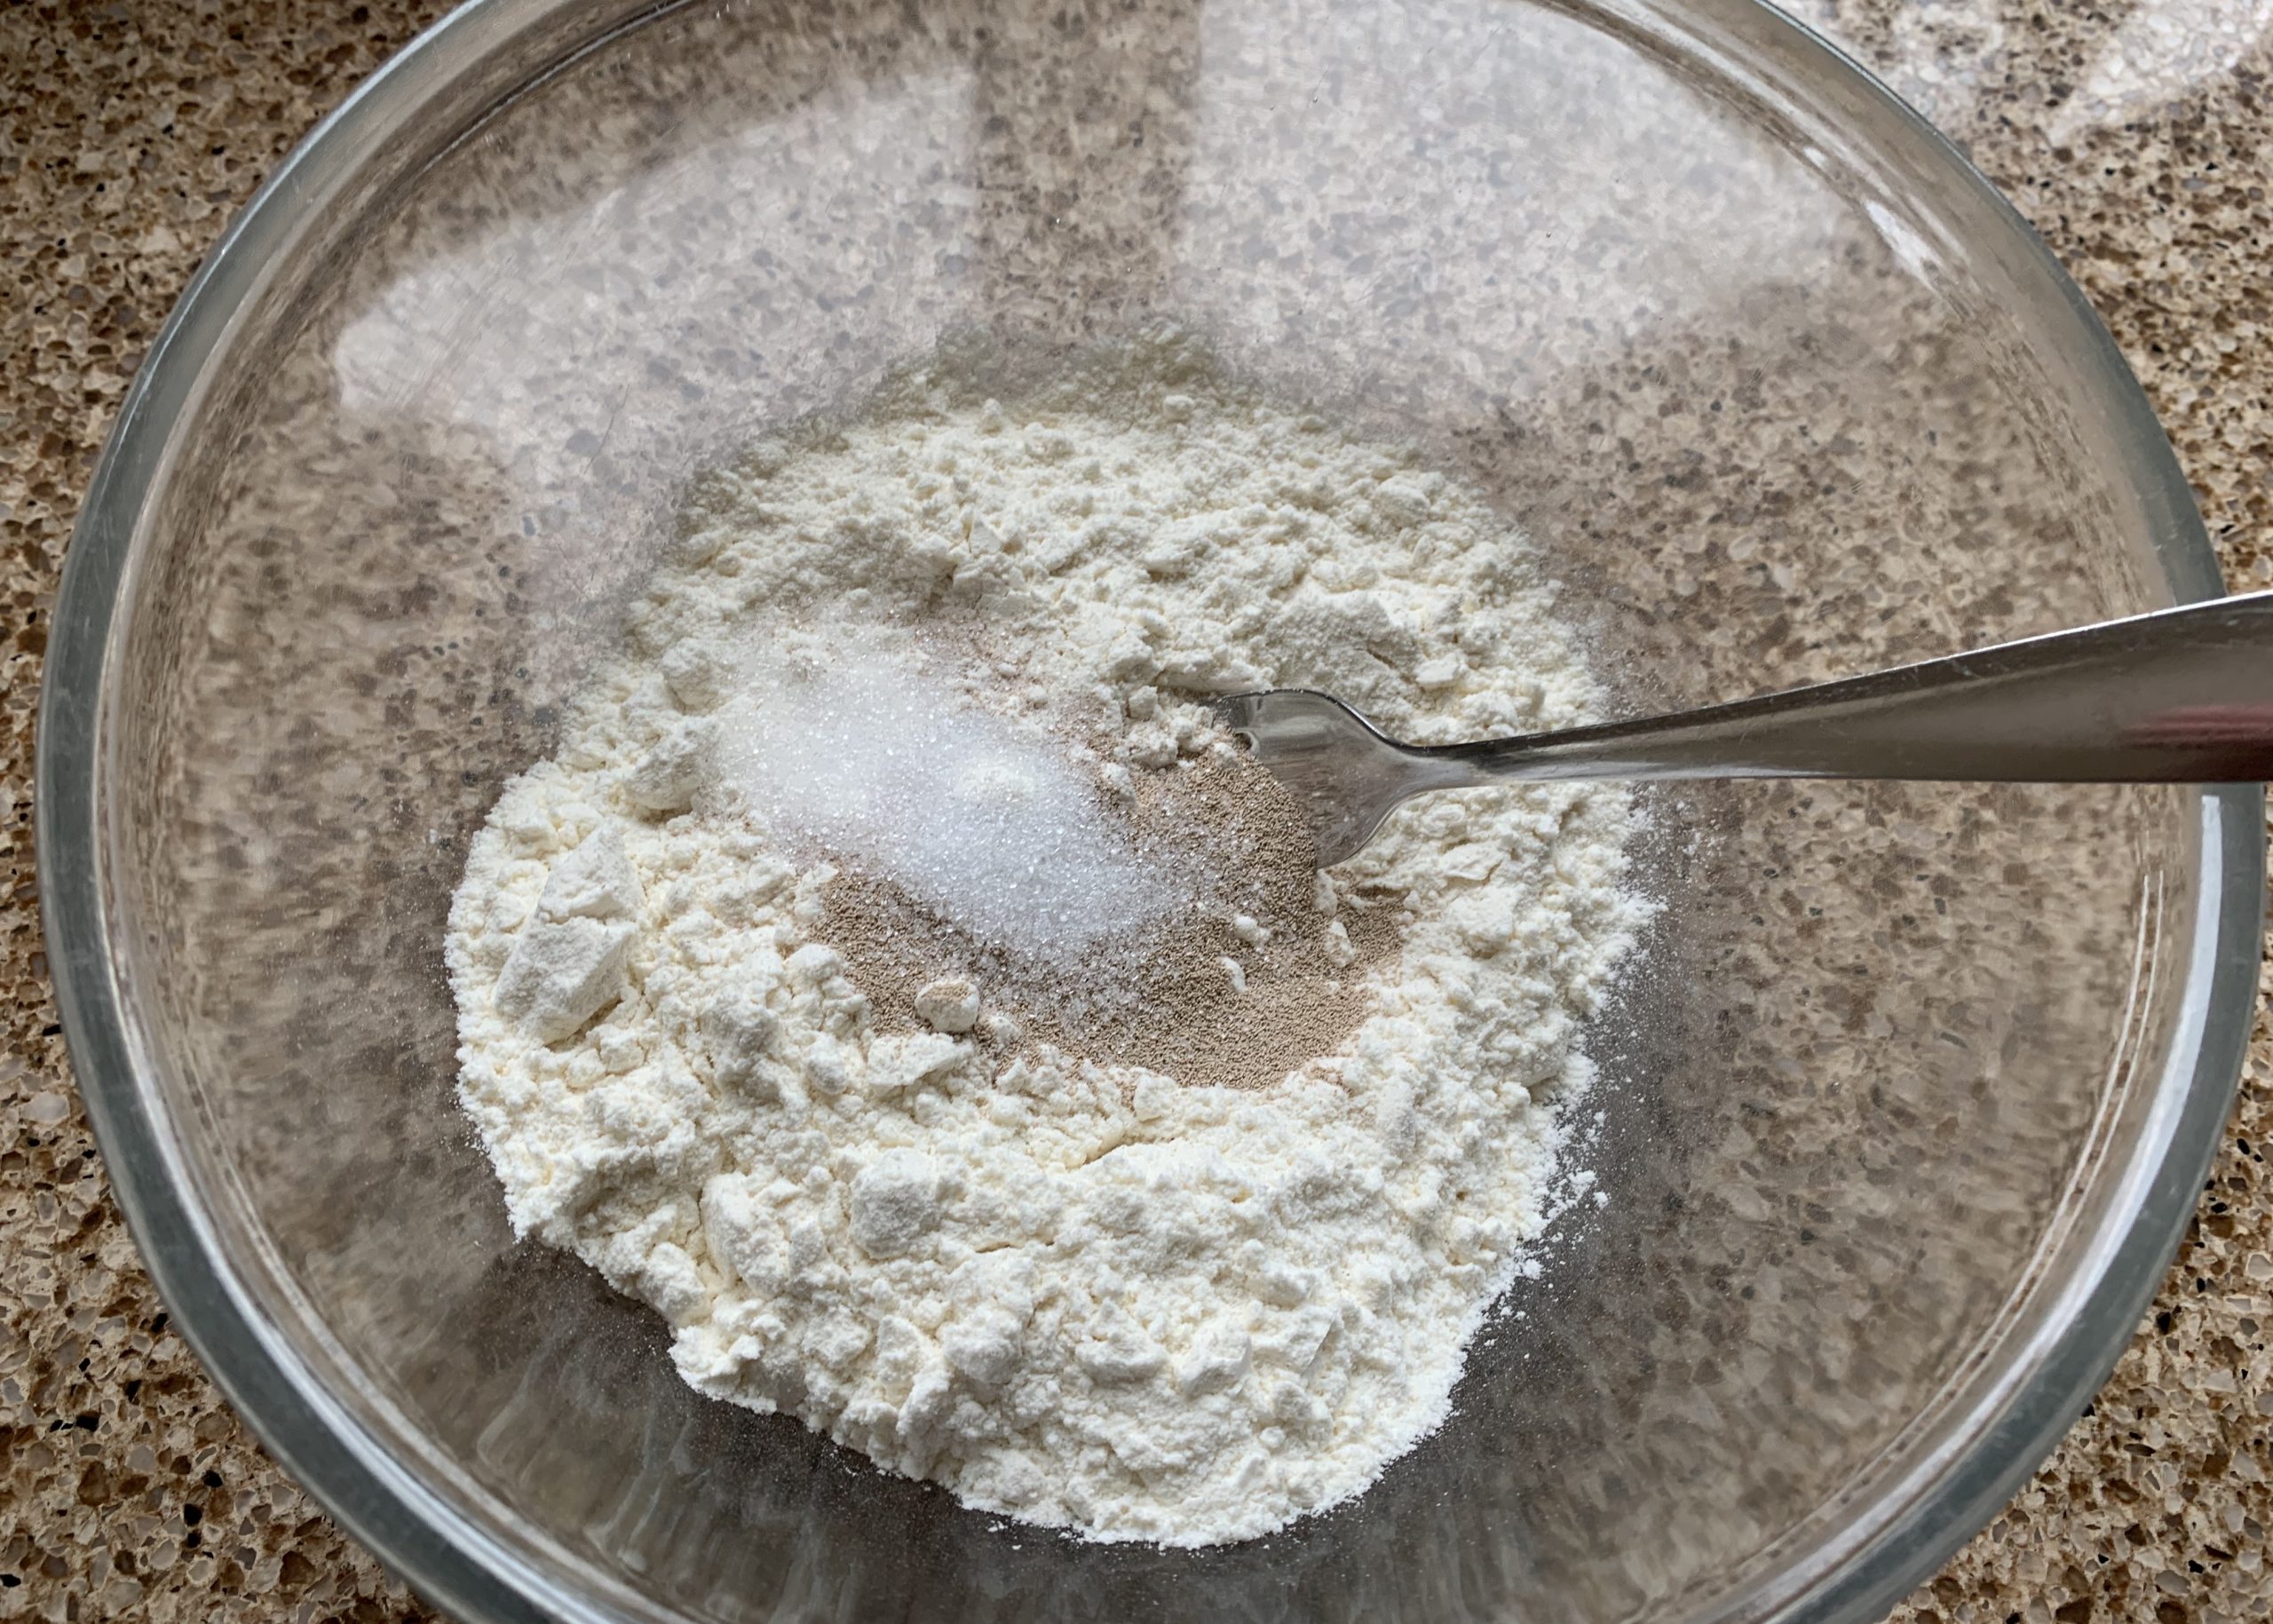 Gluten free flour, sugar and yeast in a bowl